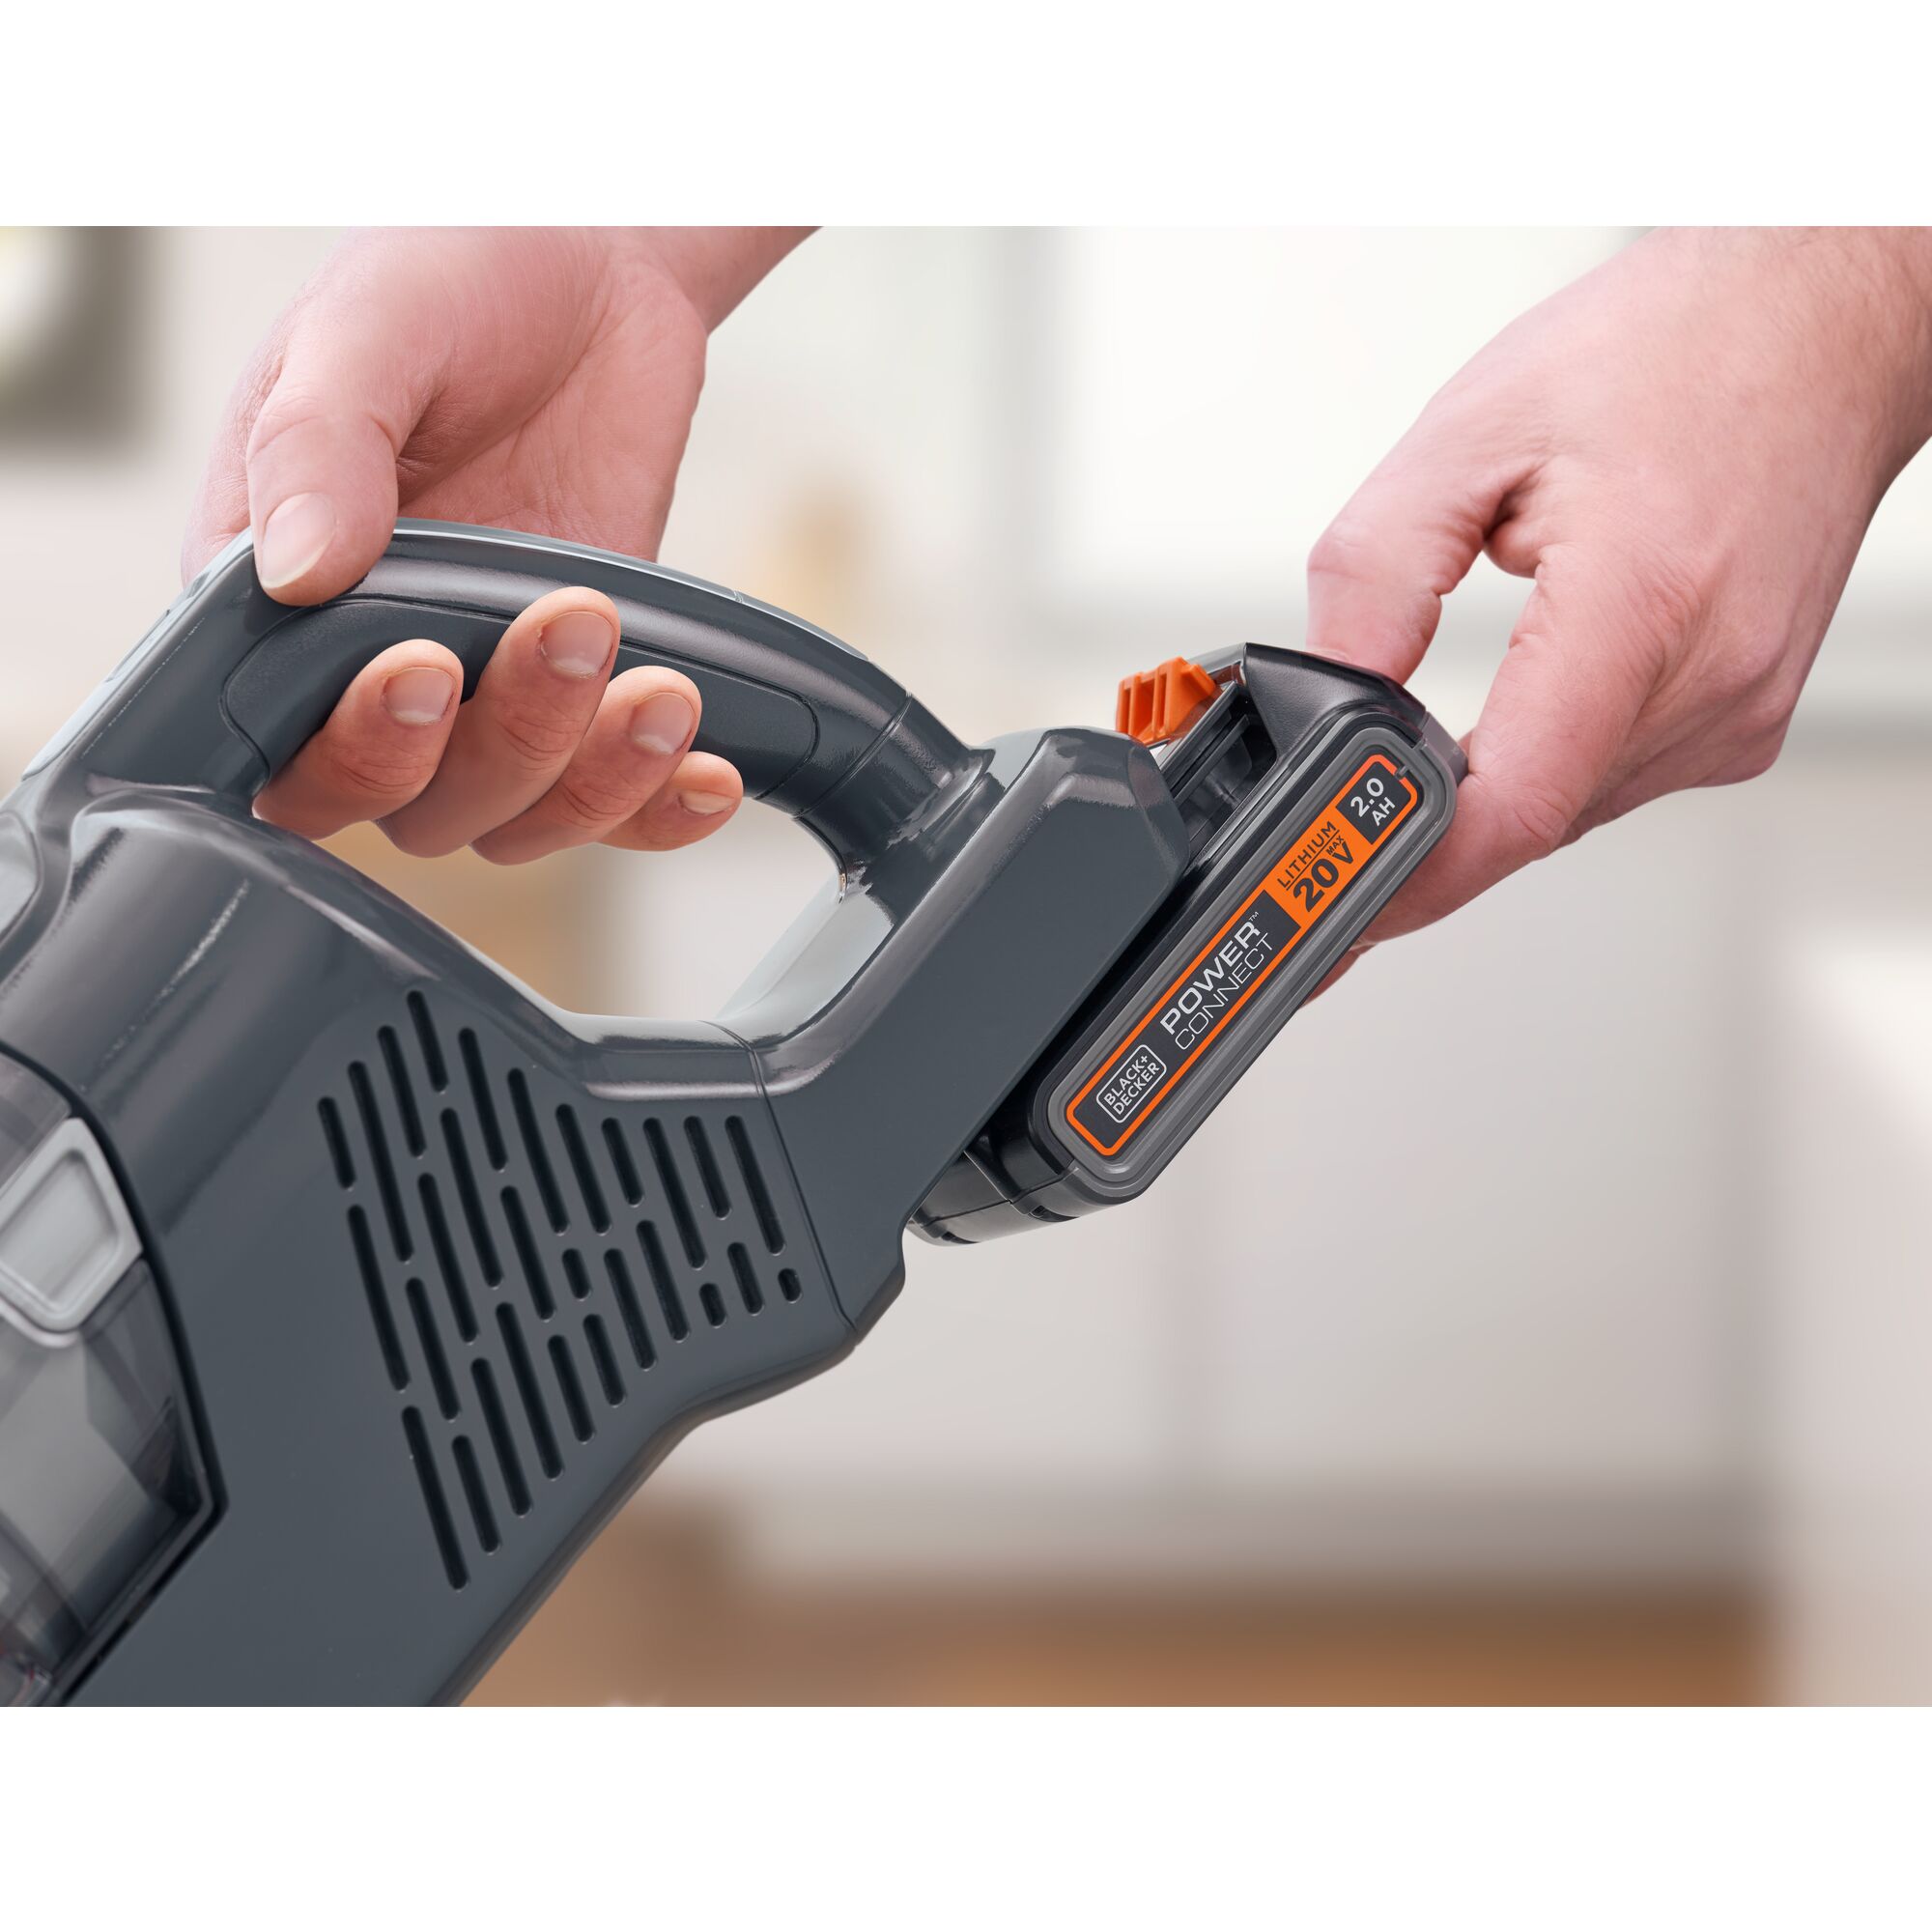 Removable battery feature of POWER SERIES plus MAX Cordless Stick Vacuum Kit.